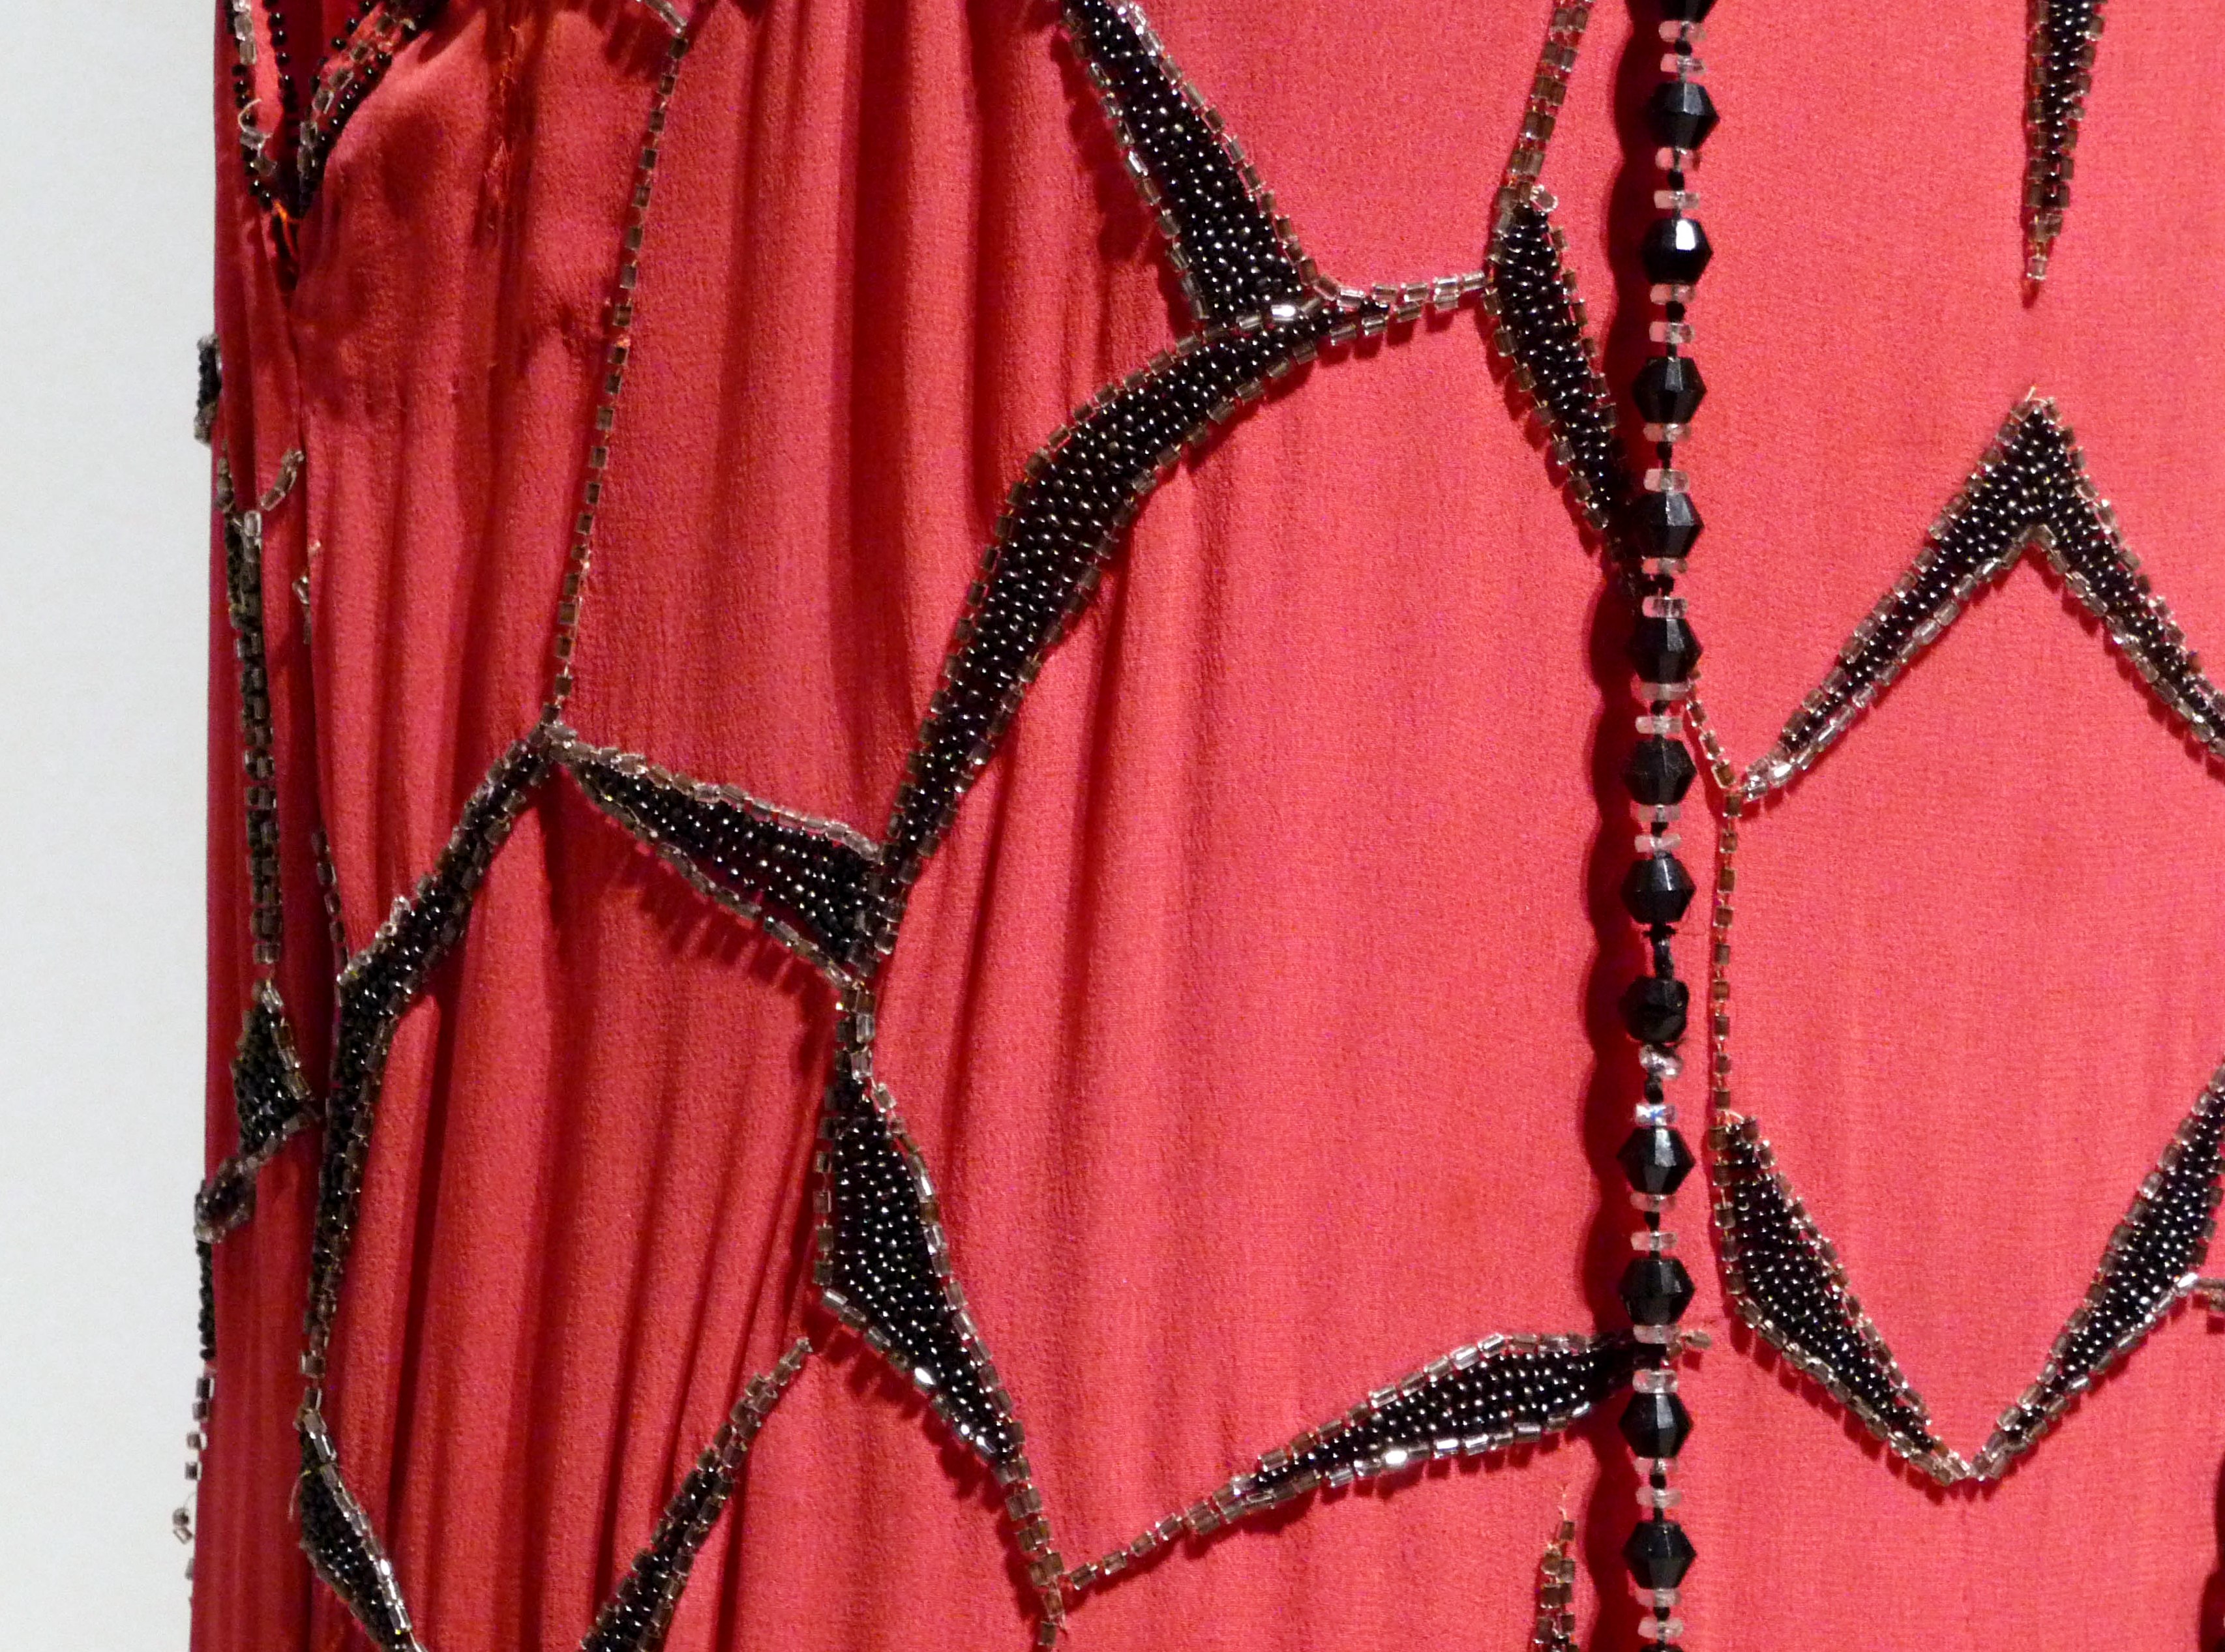 (detail) EVENING DRESS, silk crepe with applied glass bugle beads, made by Cosprop, 2012. Worn by Michelle Dockery as Lady Mary Crawley in Downton Abbey.